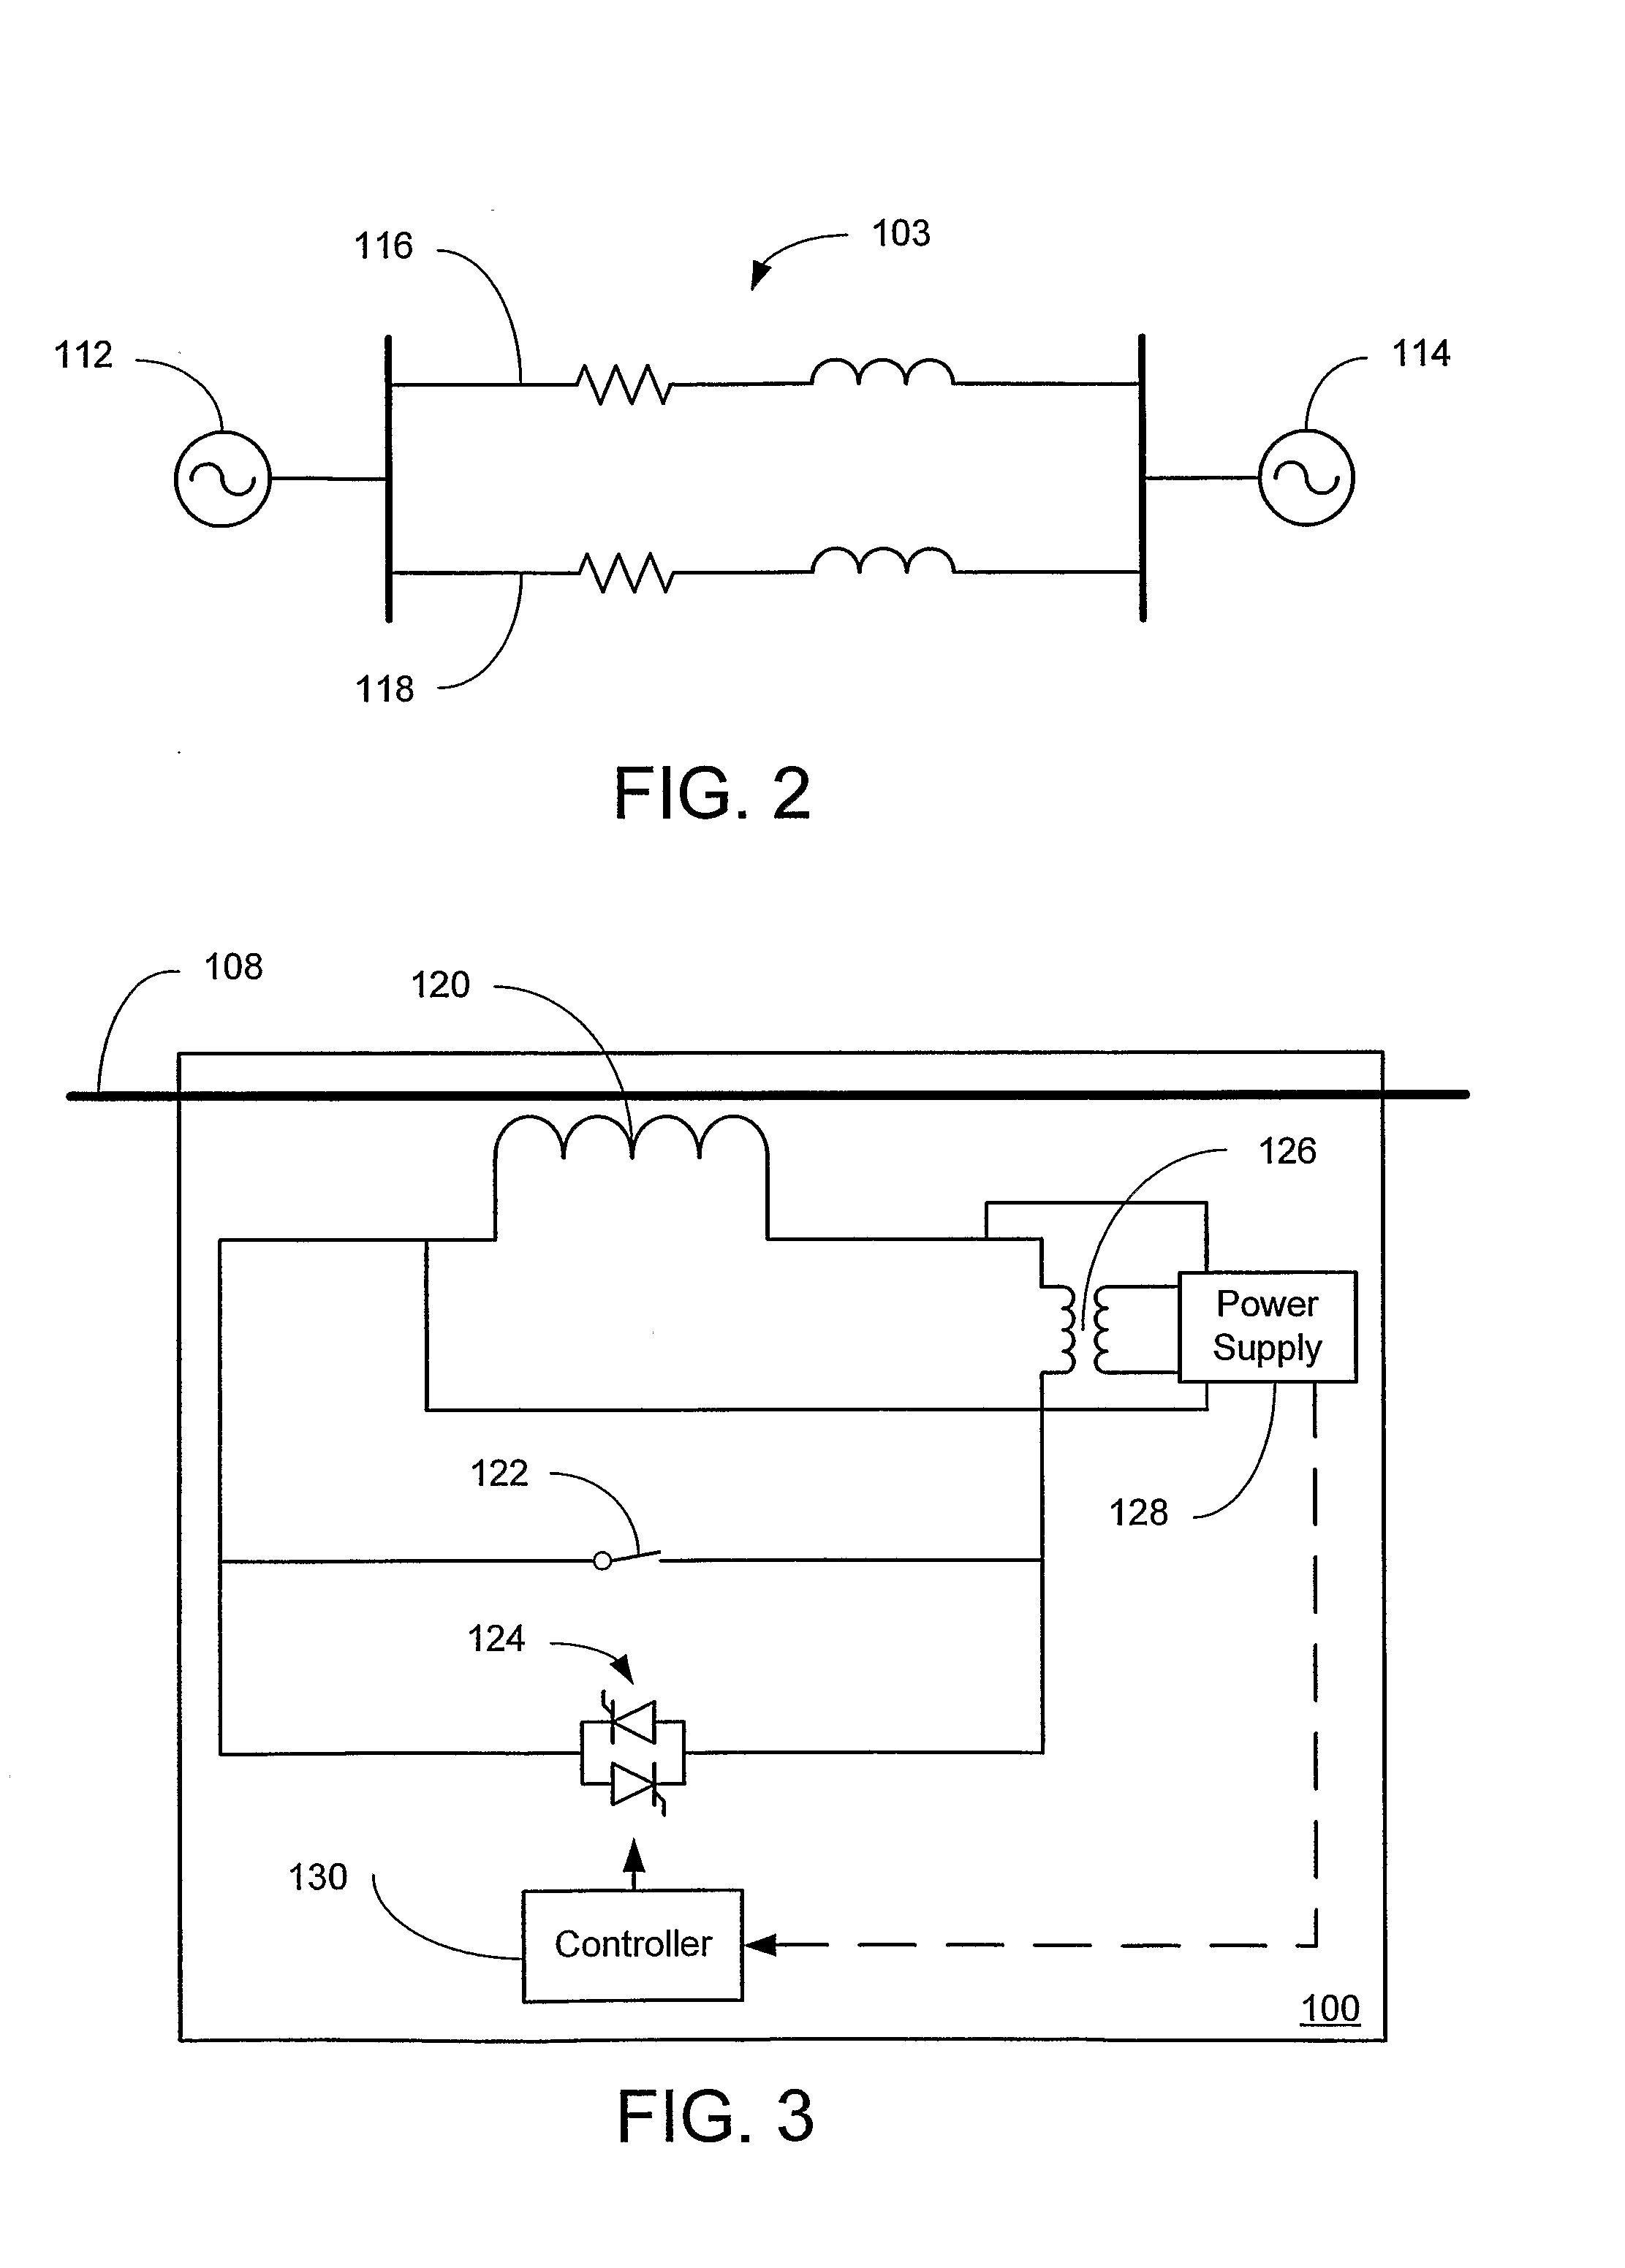 Systems and Methods for Distributed Series Compensation of Power Lines Using Passive Devices